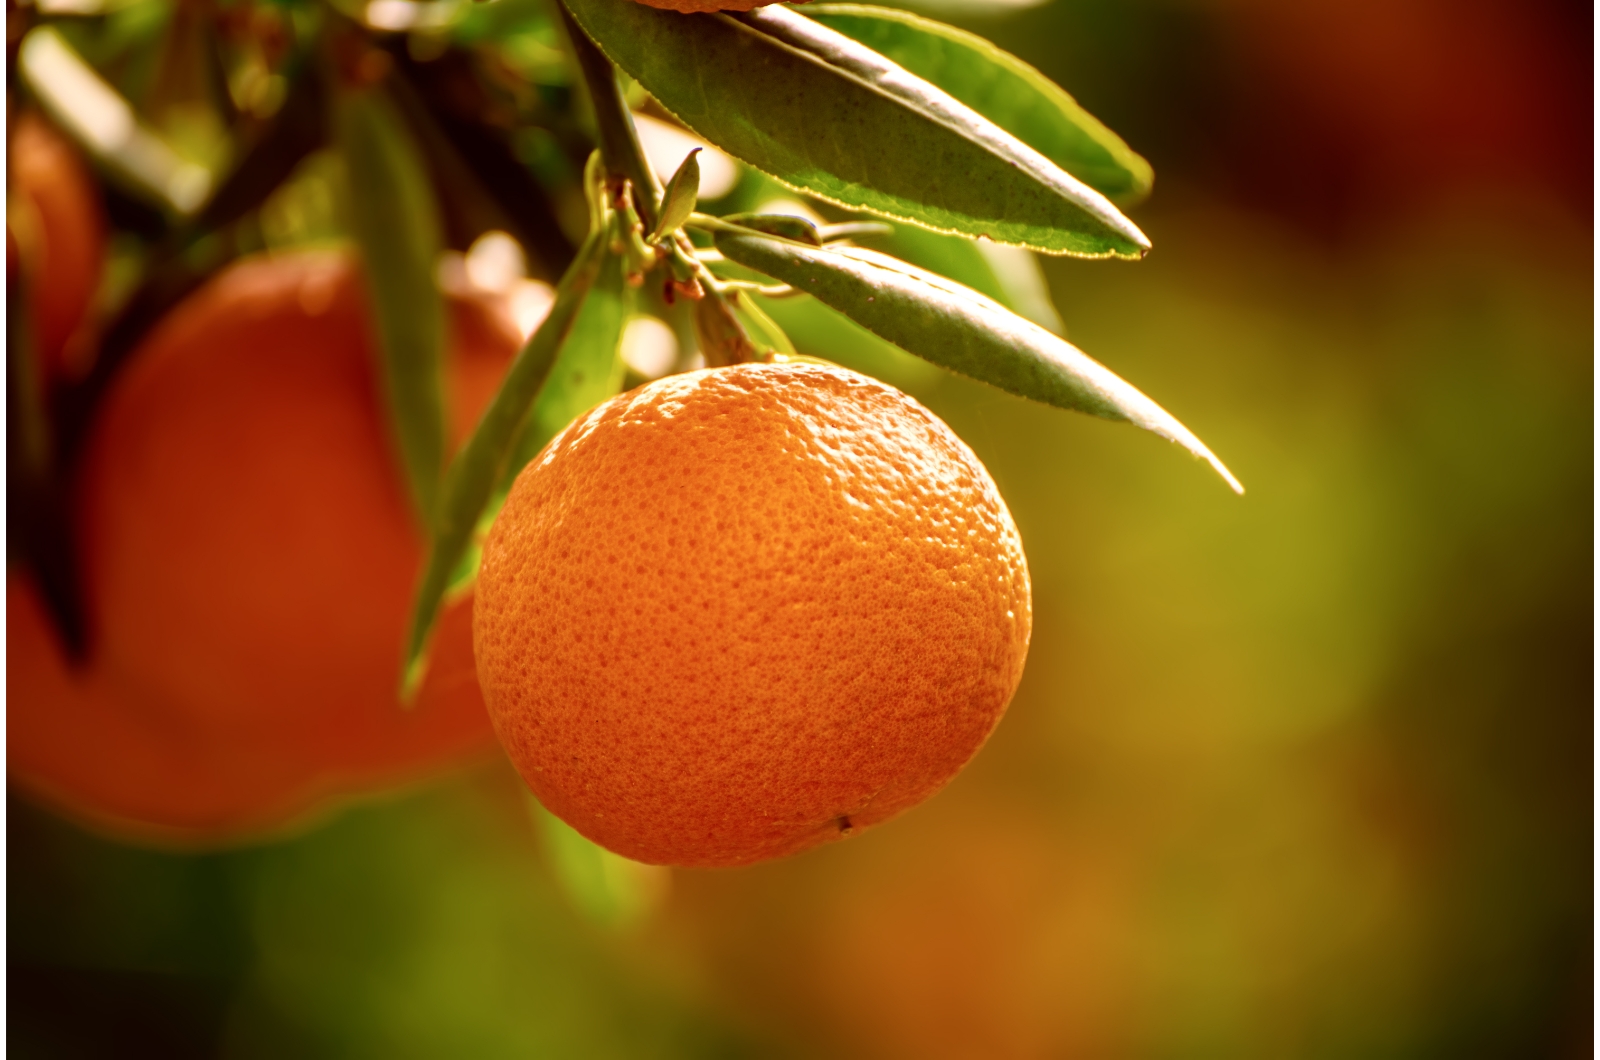 close-up photo of a tangerine